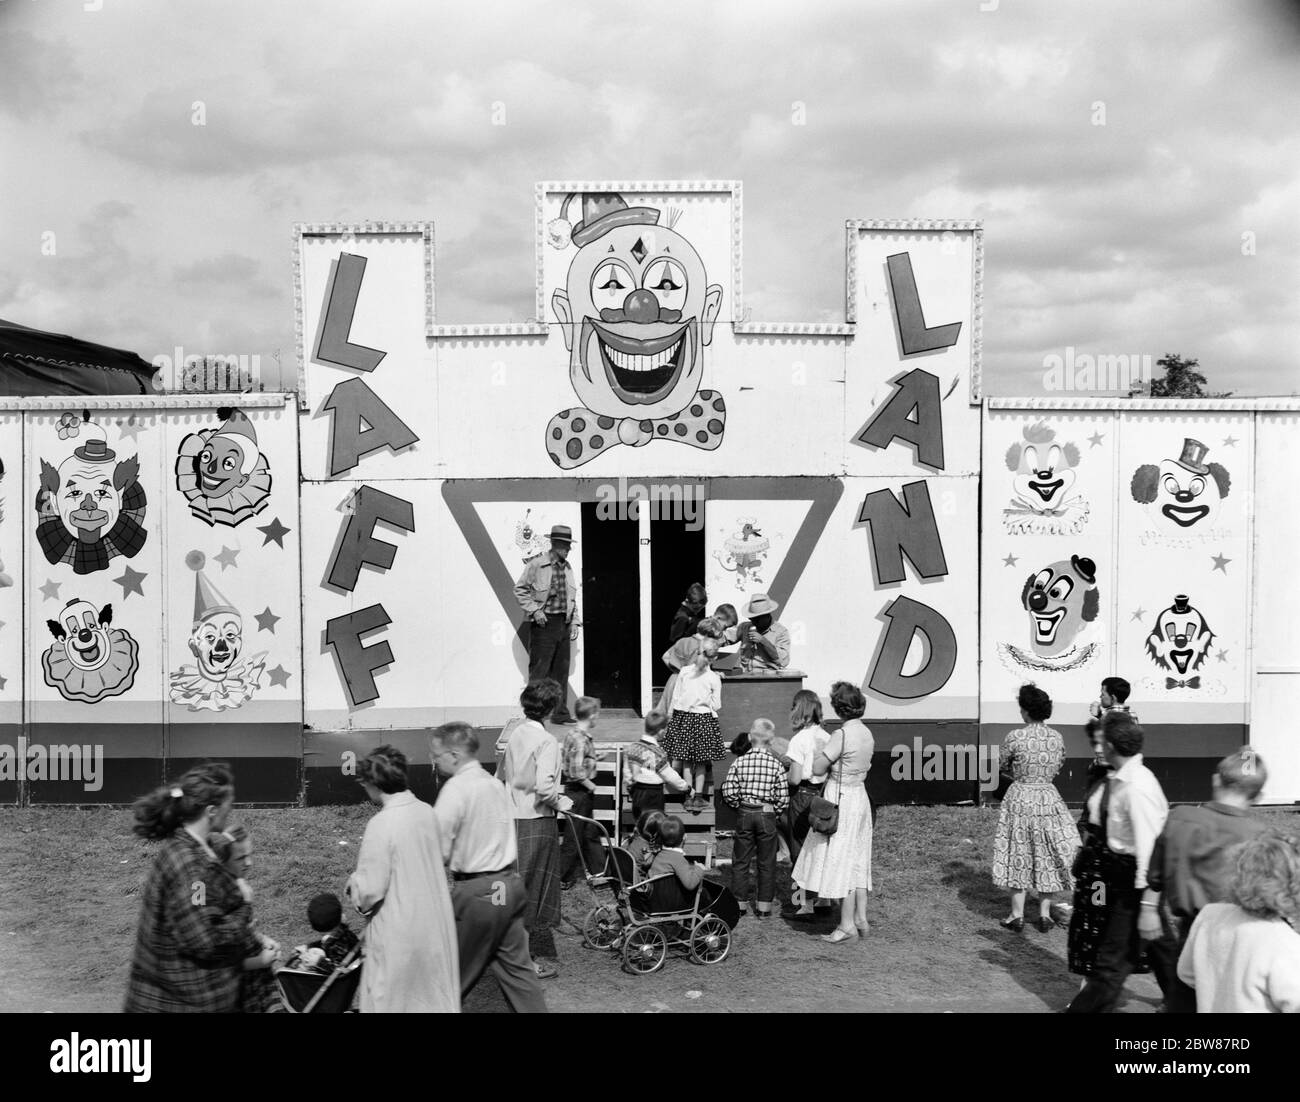 1950s LINE OF PEOPLE AT ENTRANCE TO FUNHOUSE BYING TICKETS AT LOCAL FAIR - f10060 HEL001 HARS ENTERTAINMENT B&W CLOWNS AMUSEMENT HIGH ANGLE ADVENTURE EXCITEMENT RECREATION LOCAL OCCUPATIONS FAIRS FUN HOUSE JUVENILES BLACK AND WHITE CAUCASIAN ETHNICITY OLD FASHIONED Stock Photo